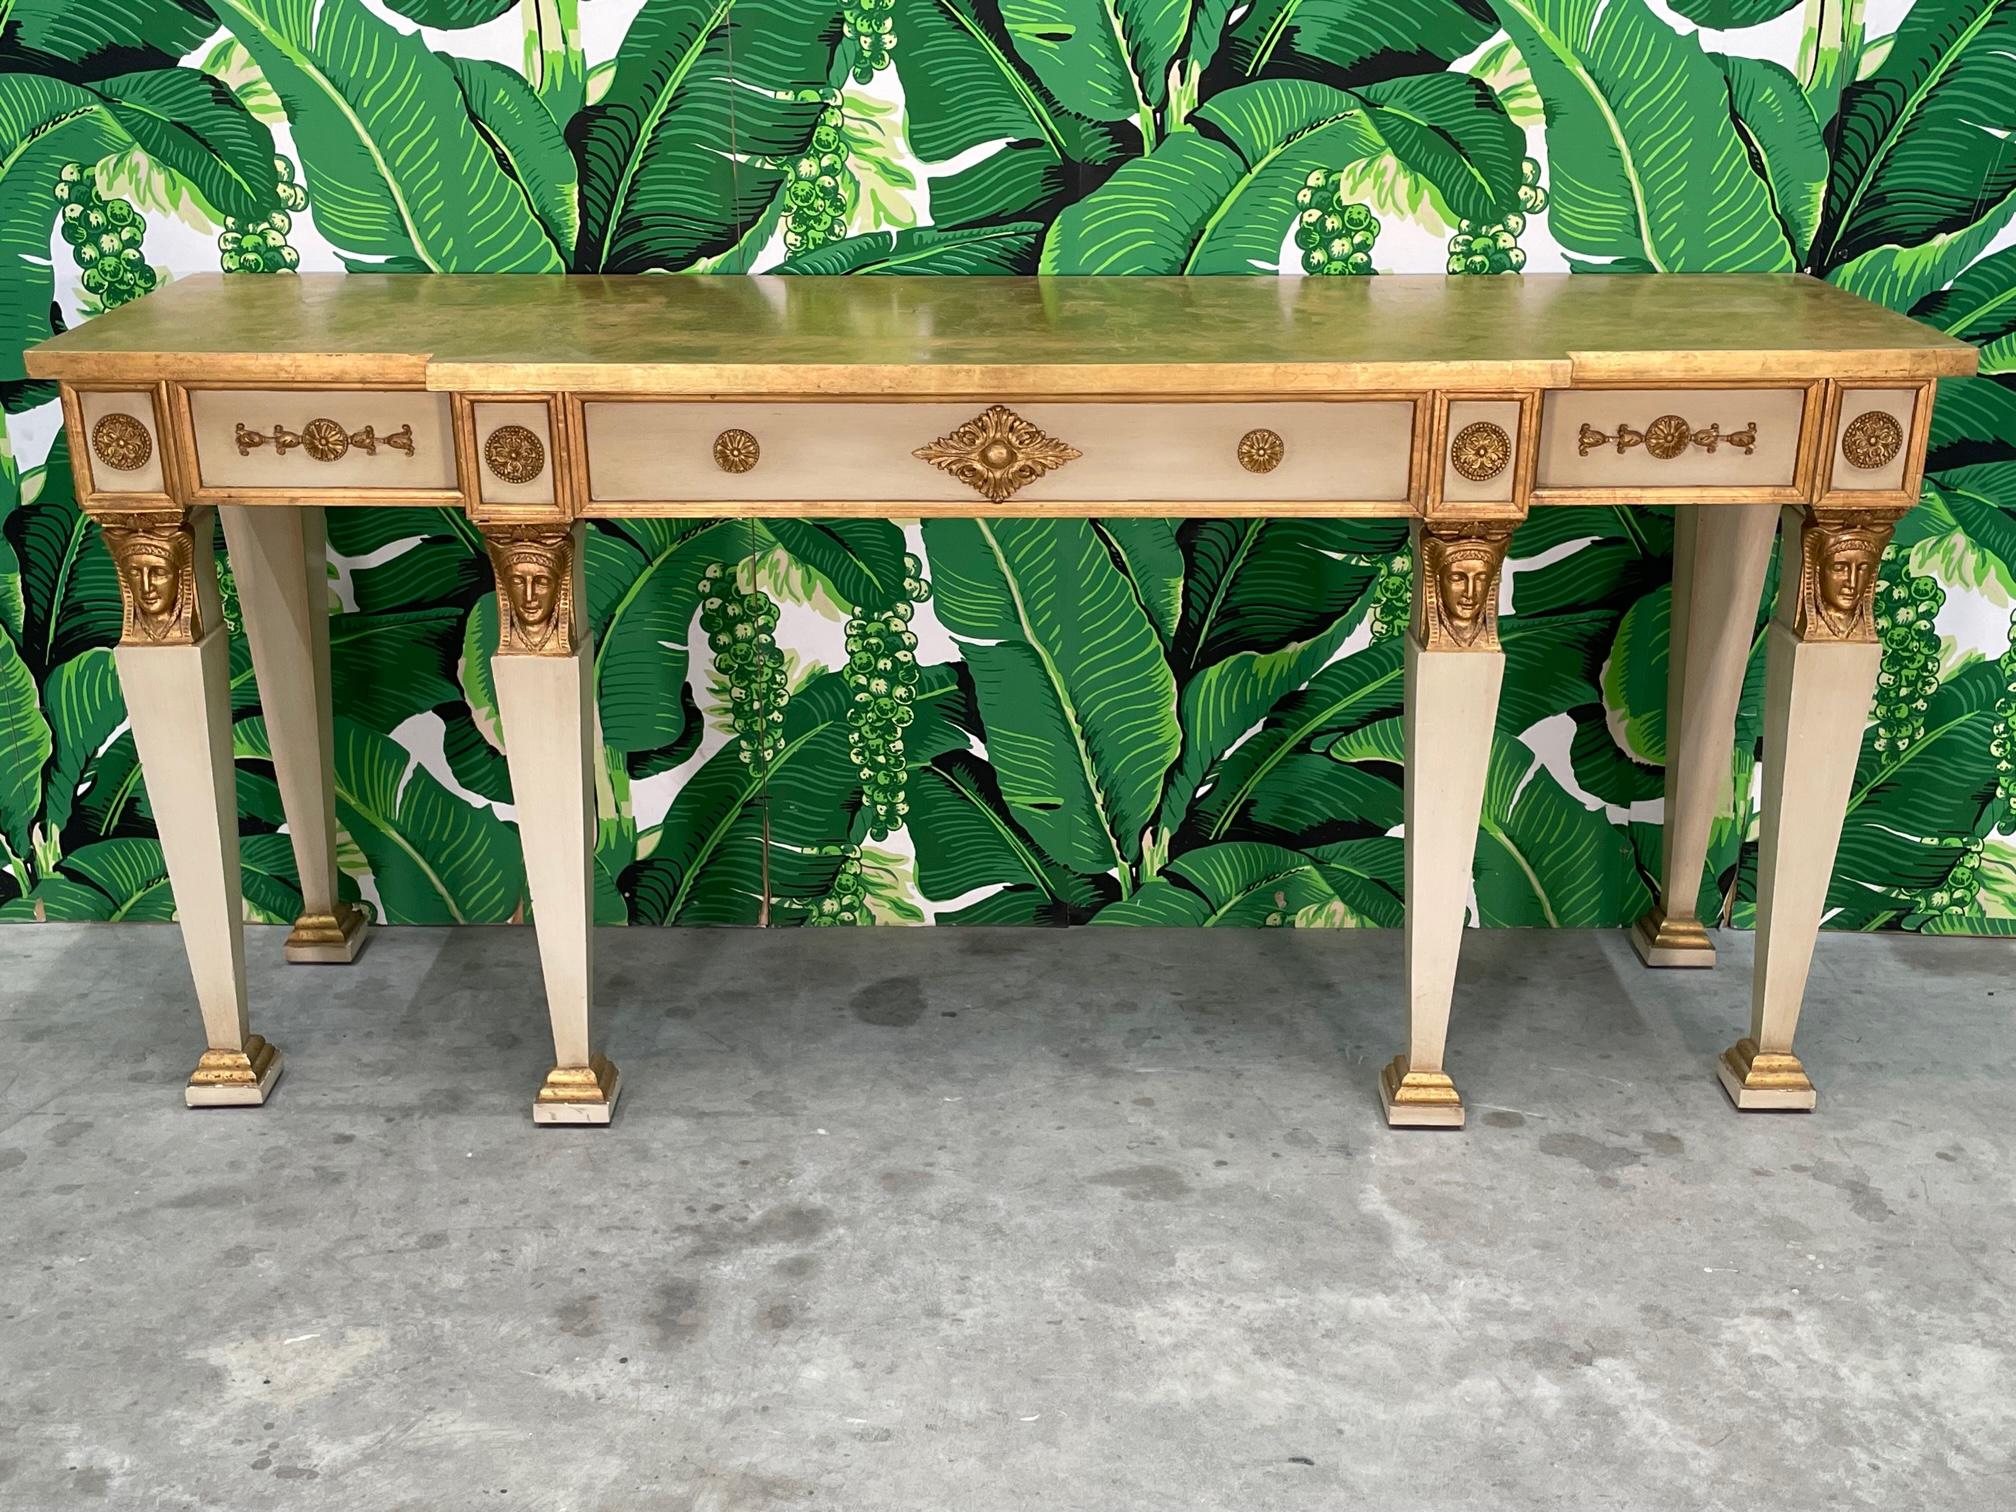 Neoclassical style console features a breakfront design highlighted by carved faces and ornate appliquéd detailing. Good condition with imperfections consistent with age, see photos for condition details. 
For a shipping quote to your exact zip